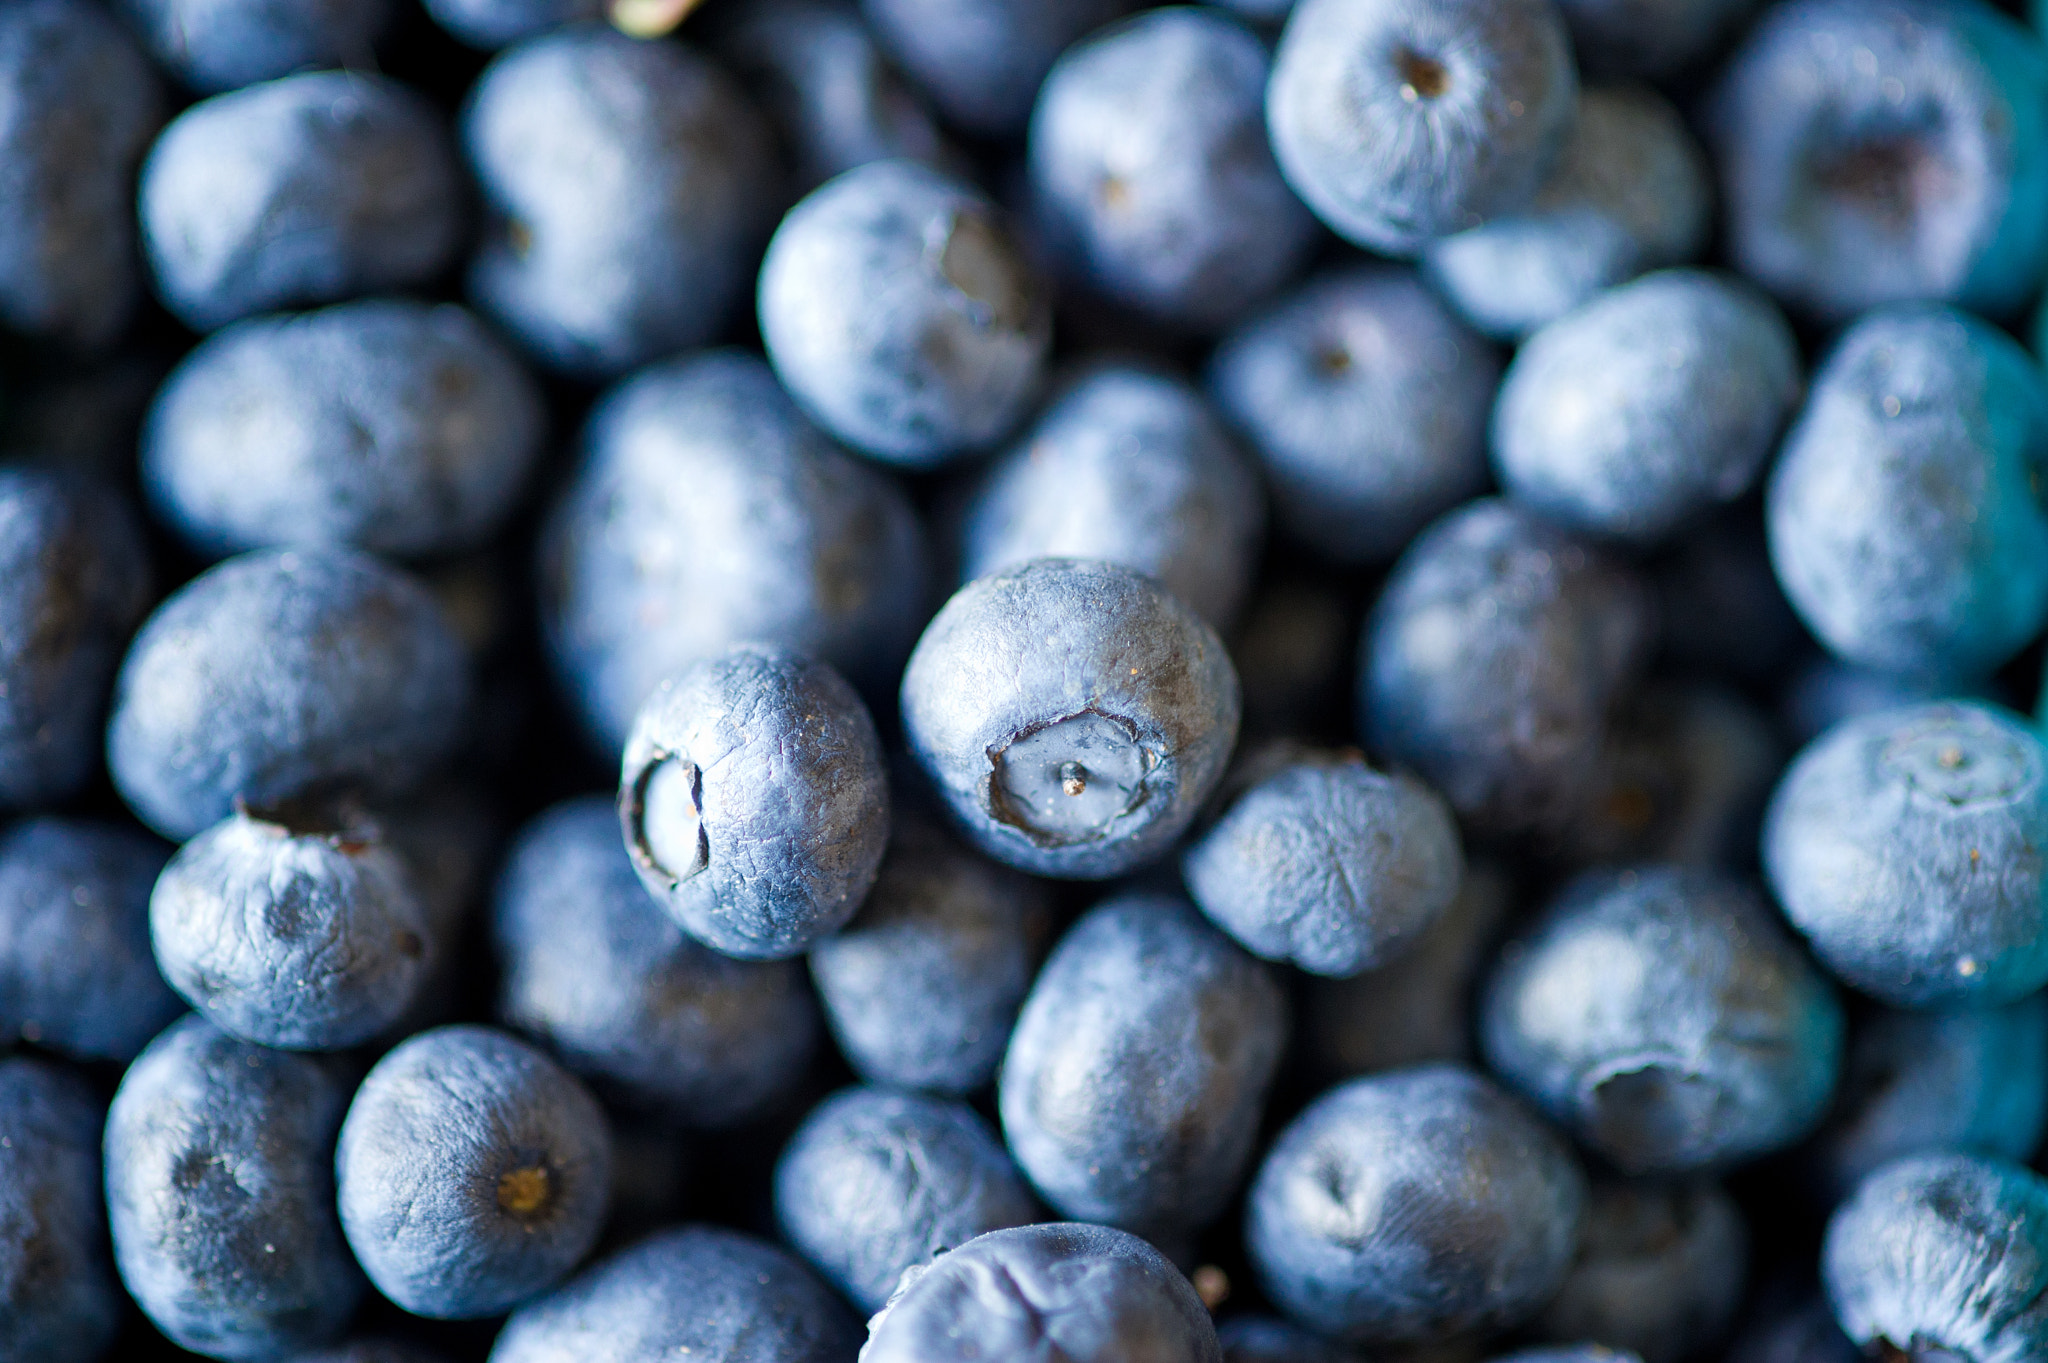 Nikon D3S sample photo. Crates of blueberries for sale at a farmer's market photography